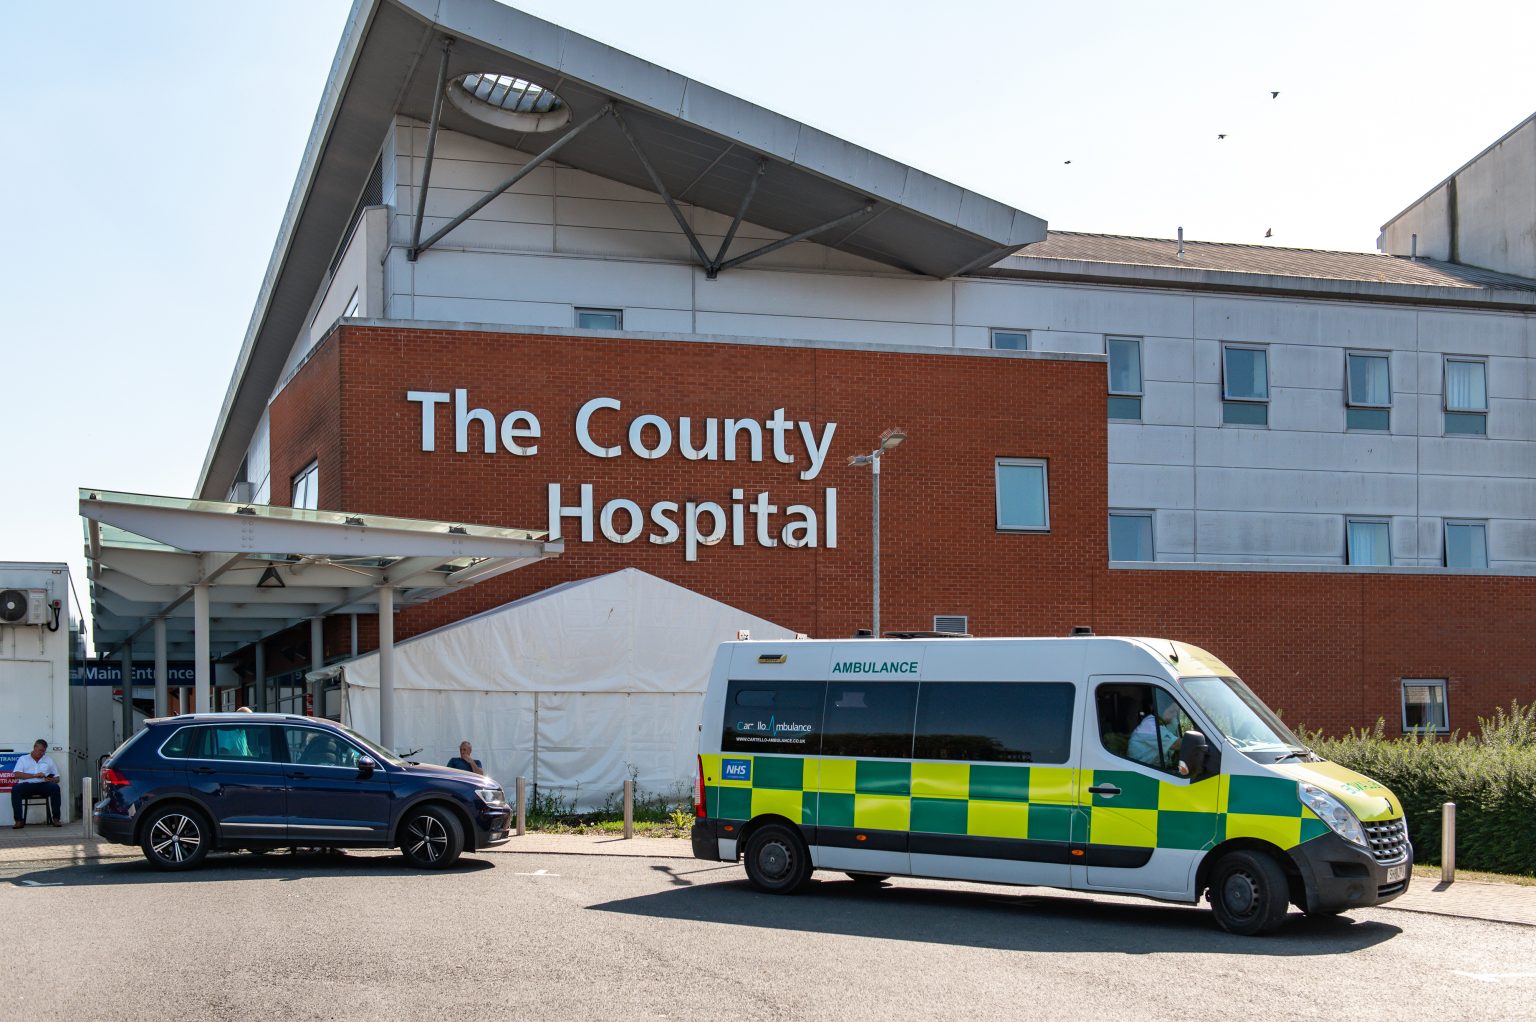 NEWS | Visiting restrictions remain in place at hospitals in Herefordshire – FULL DETAILS